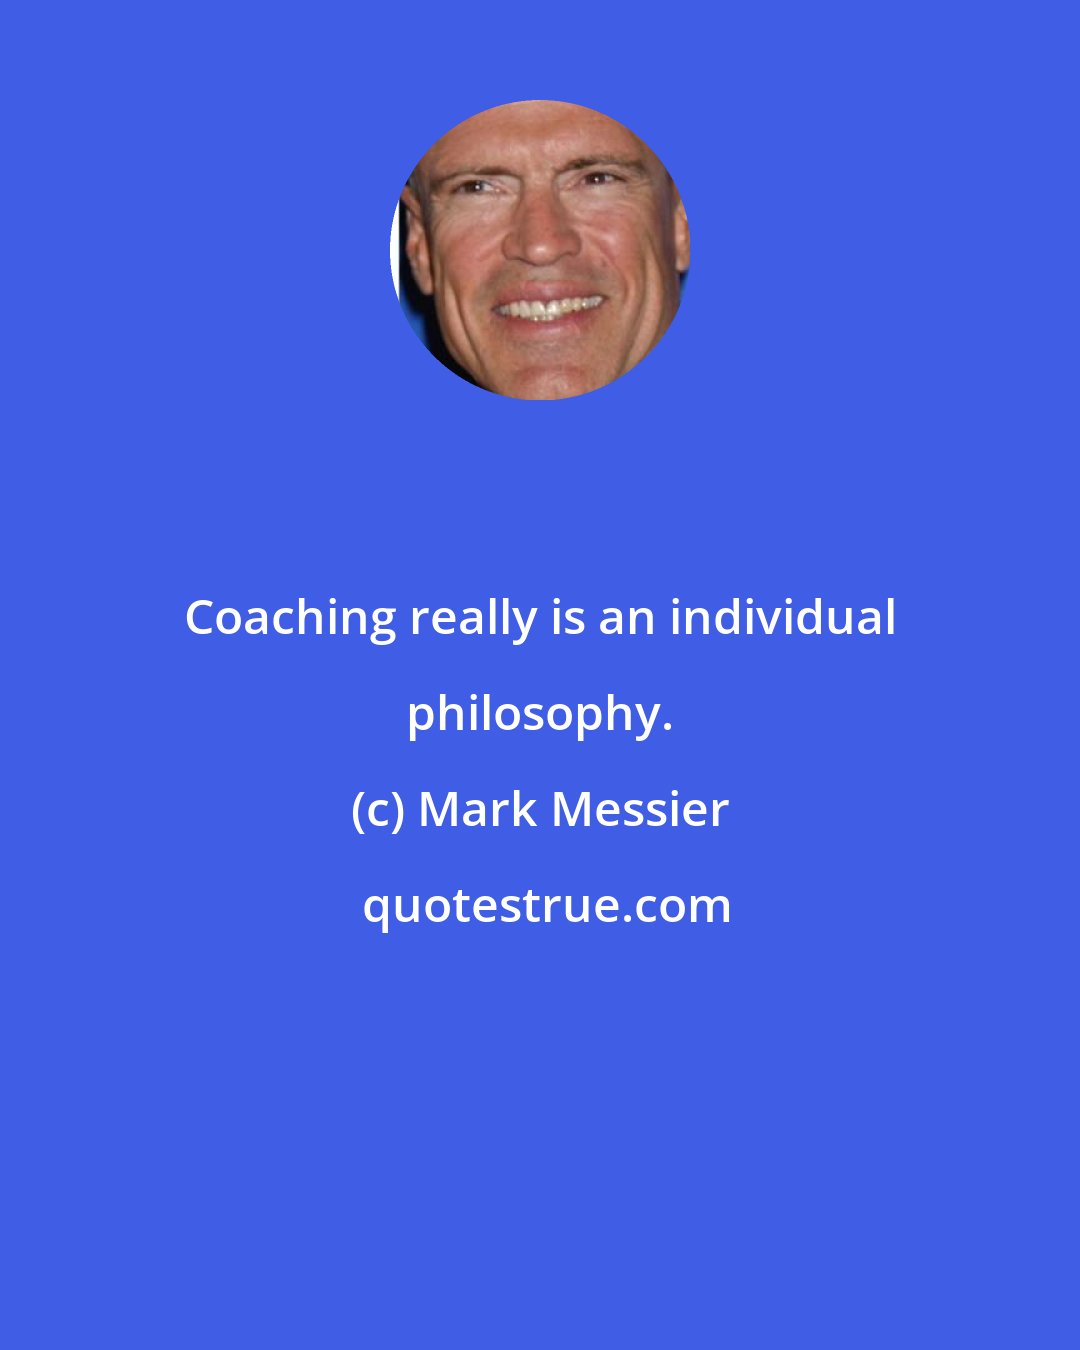 Mark Messier: Coaching really is an individual philosophy.